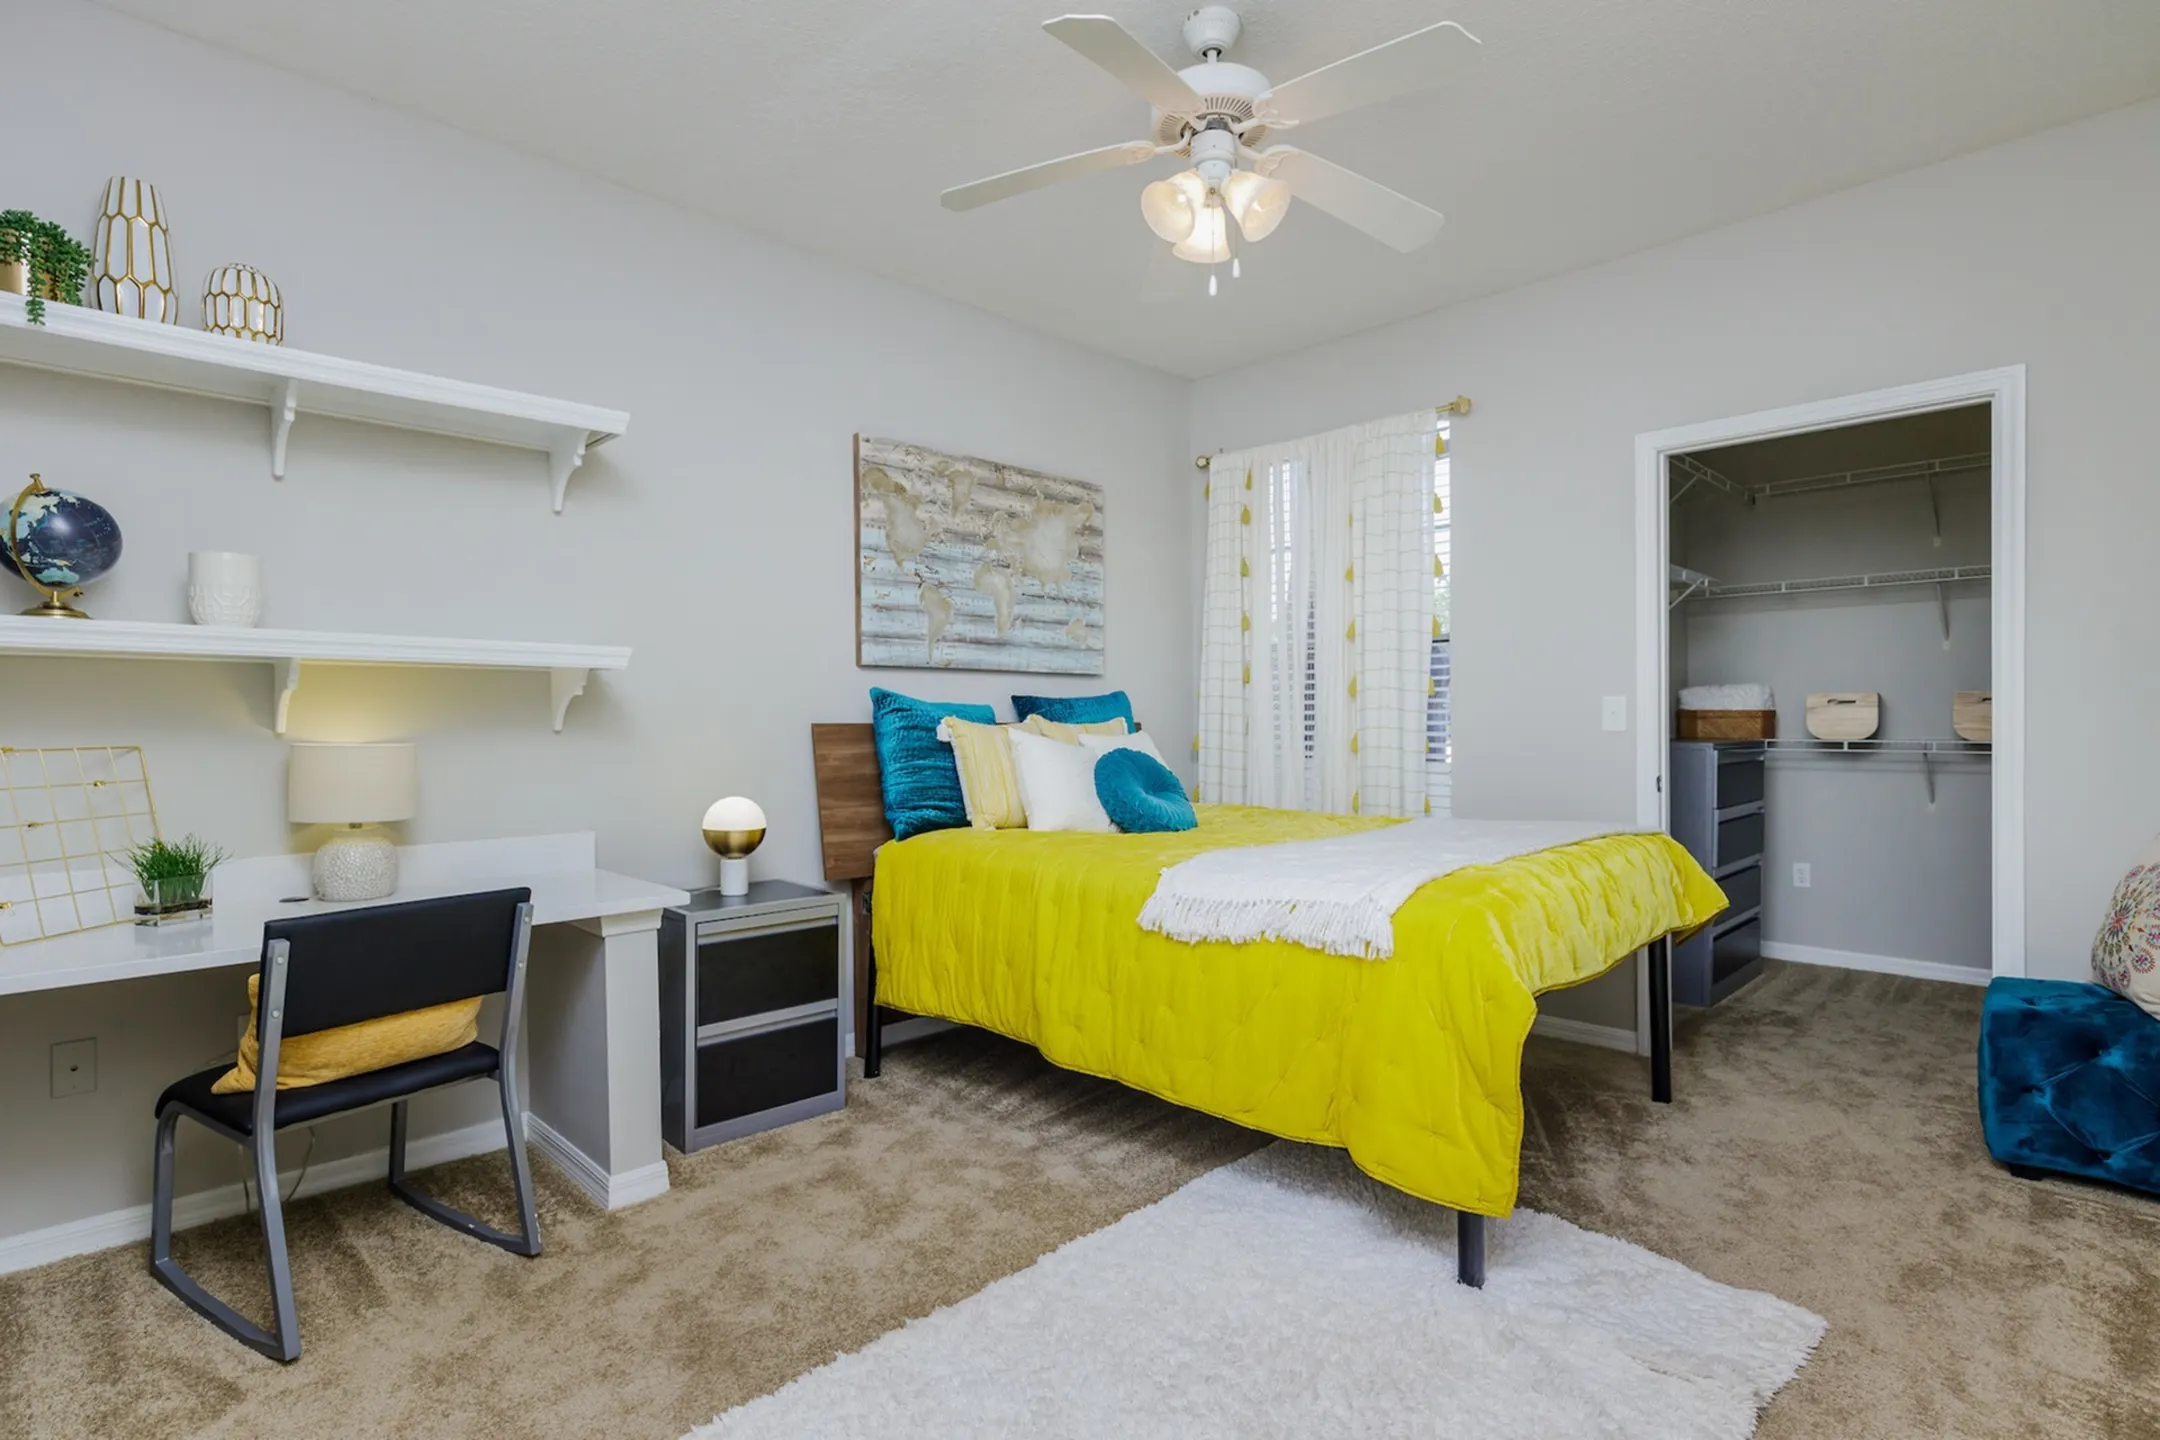 Bedroom - West 10 Apartments - Per Bed Lease - Tallahassee, FL